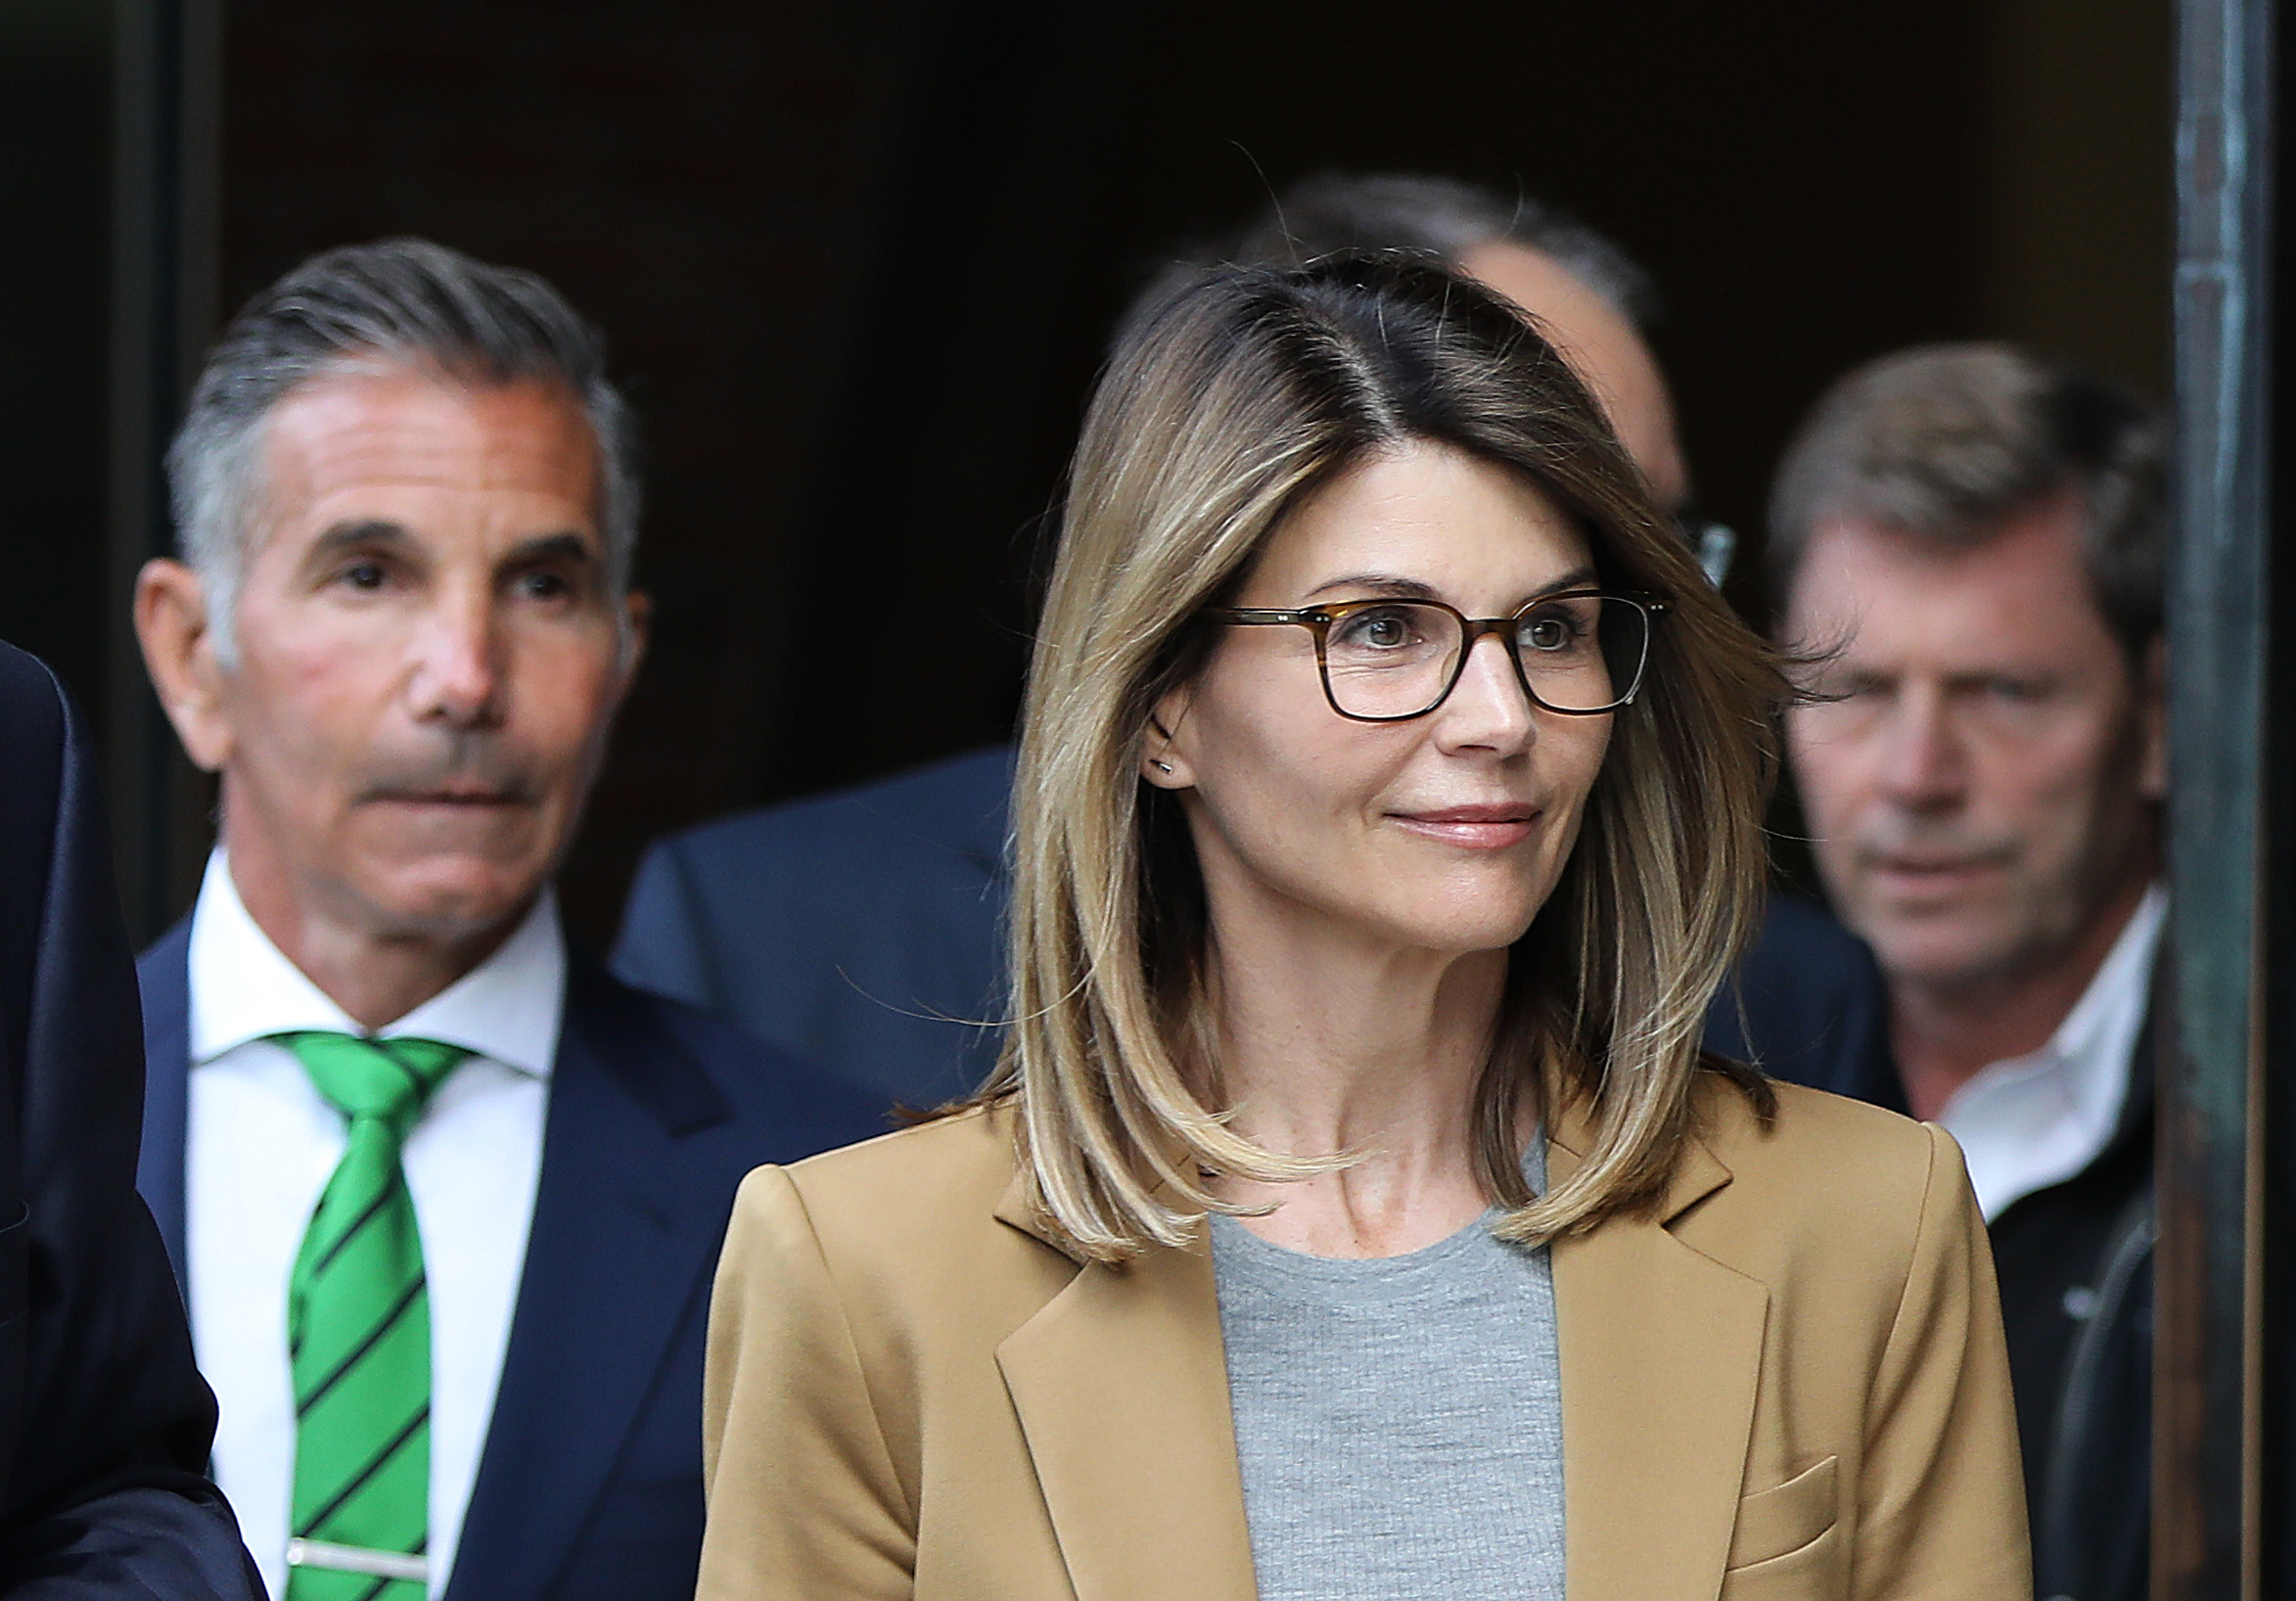 Lori Loughlin and her husband Mossimo Giannulli, on the left, leaving the courthouse on April 3, 2019 | Source: Getty Images